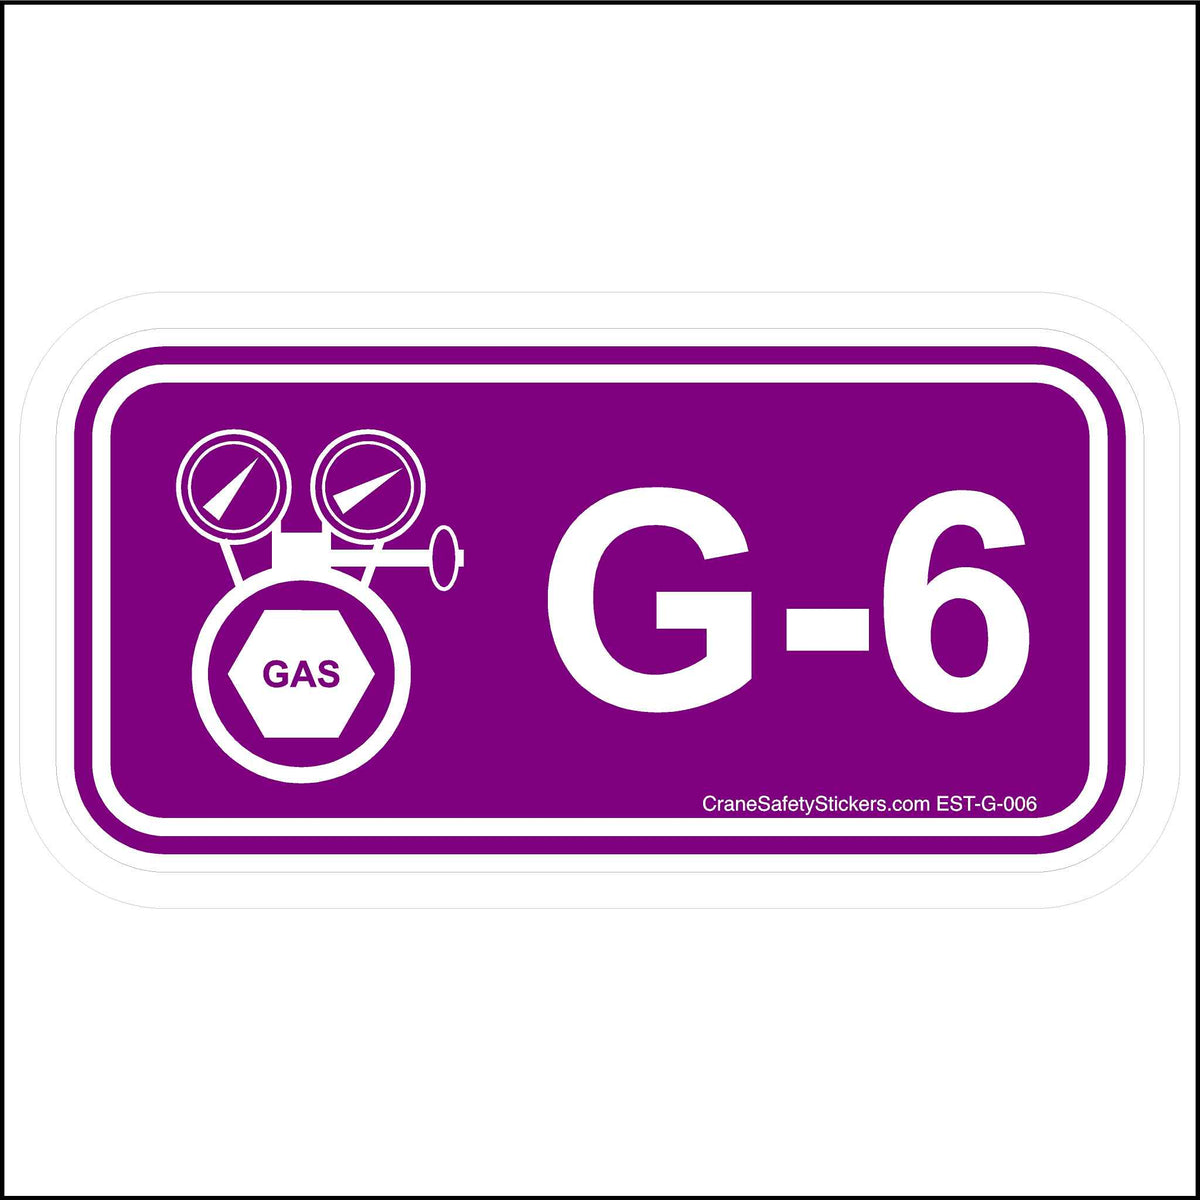 Energy Control Program Gas Disconnect Stickers G-6.